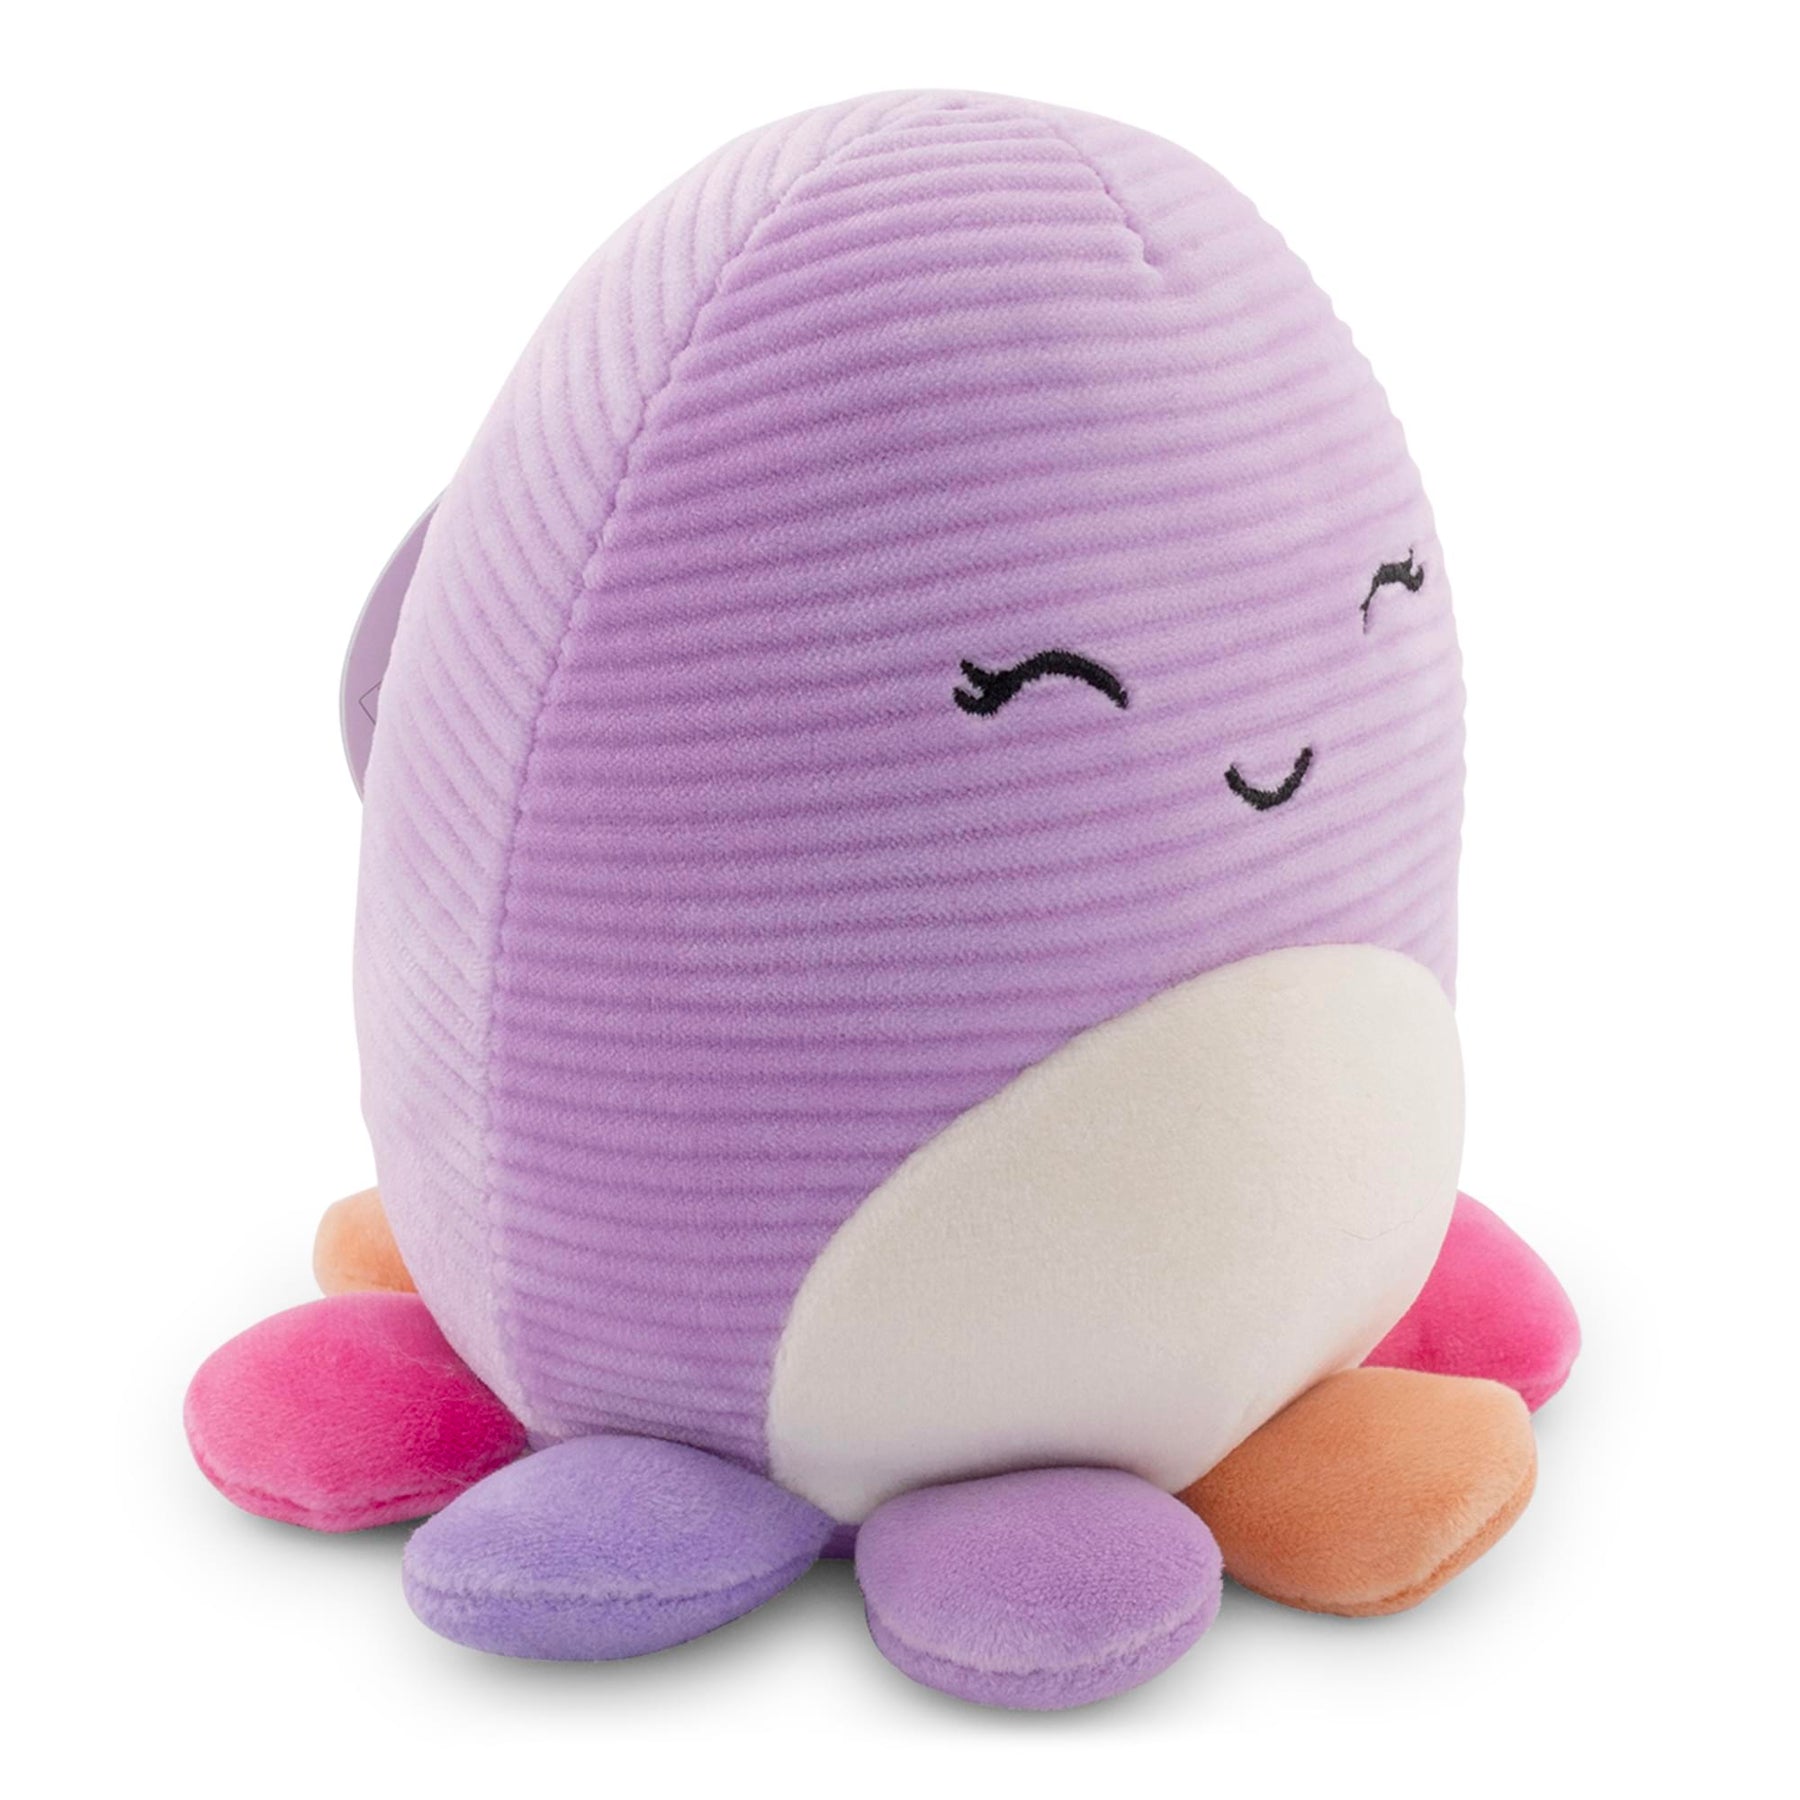 Squishmallows 5 Inch Squisharoy Plush | Beula The Octopus